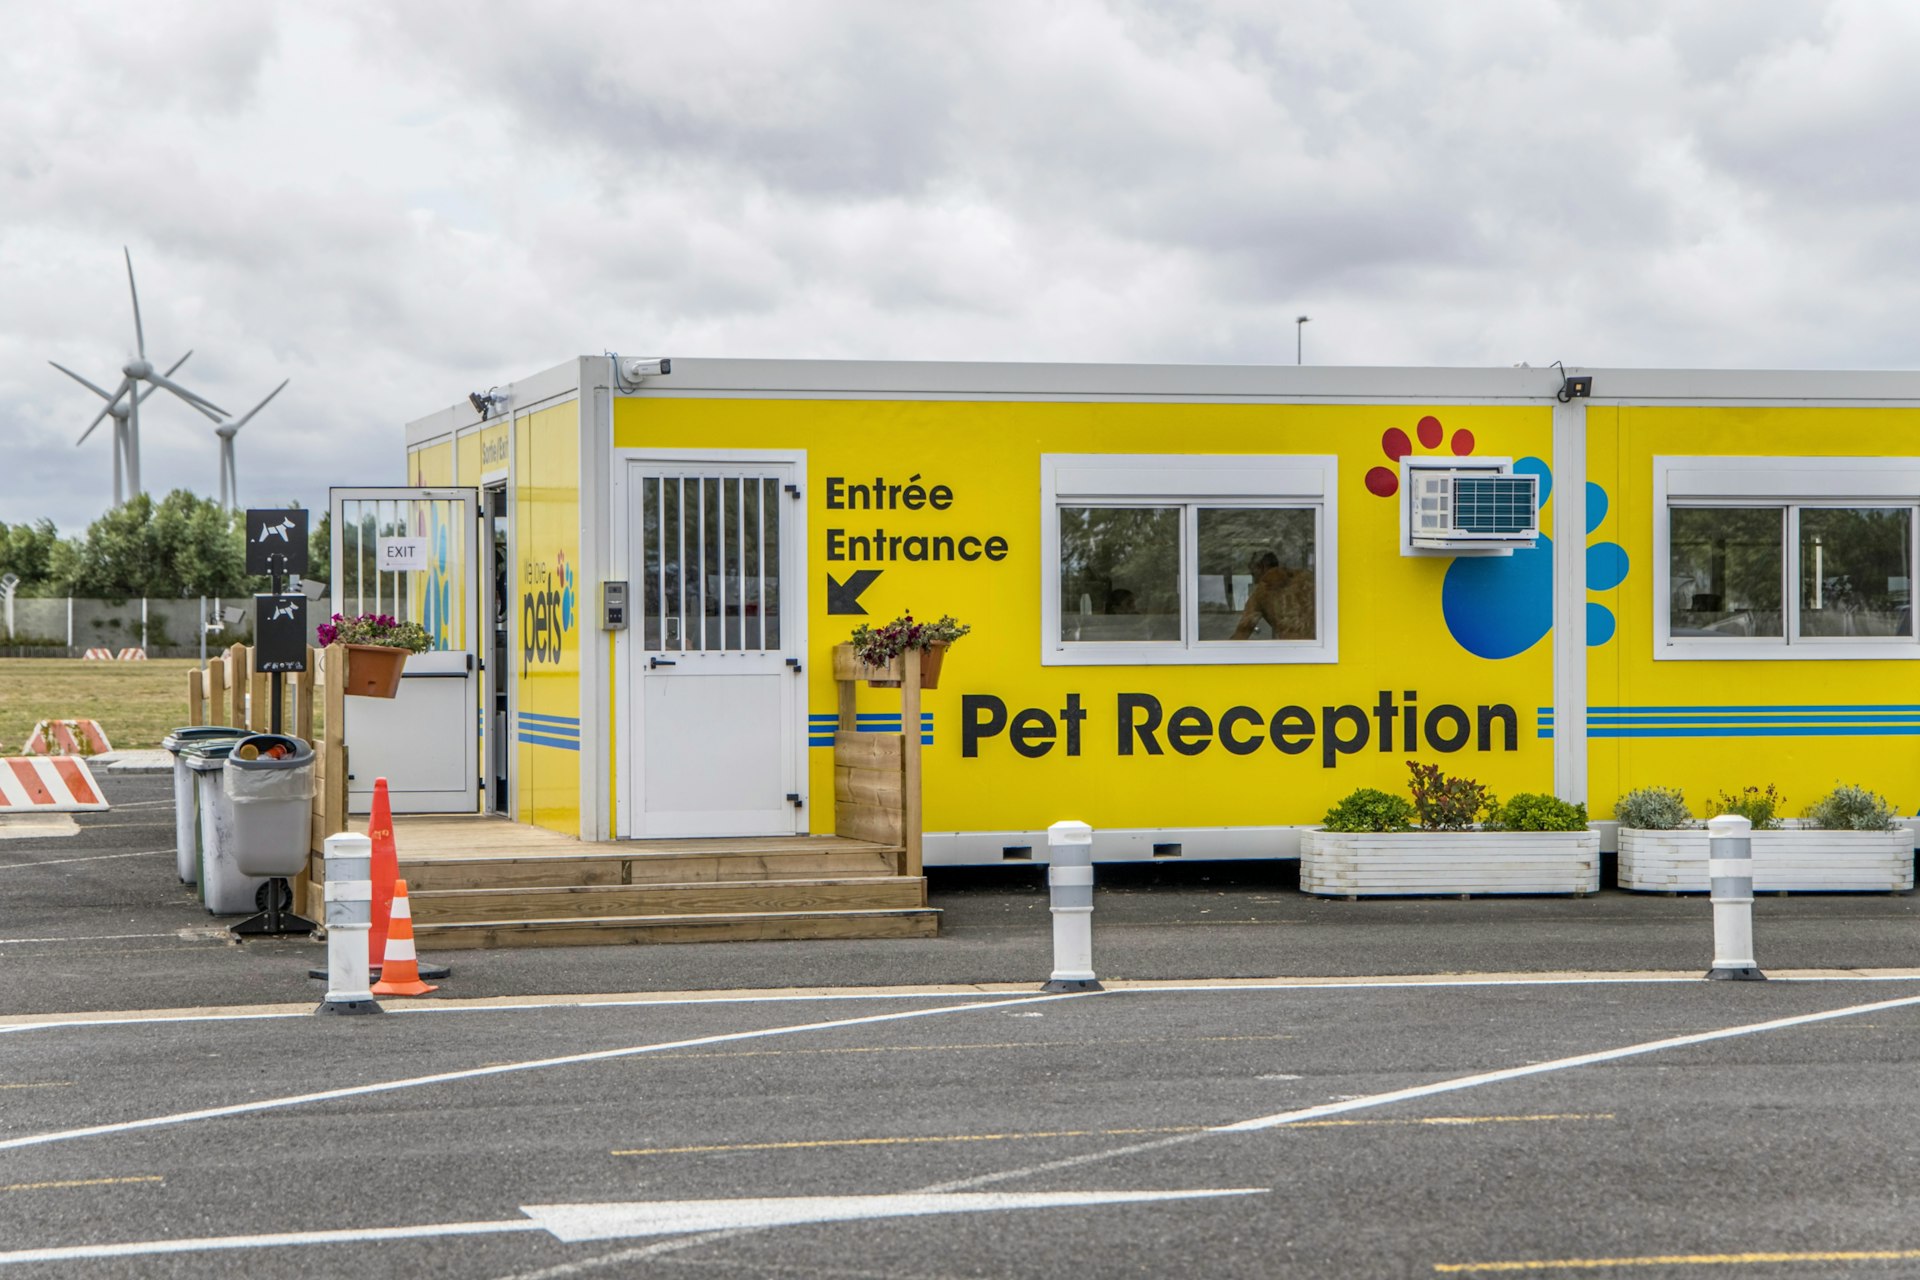 A bright yellow portacabin labelled "Pet Reception," with some steps leading up to the entrance